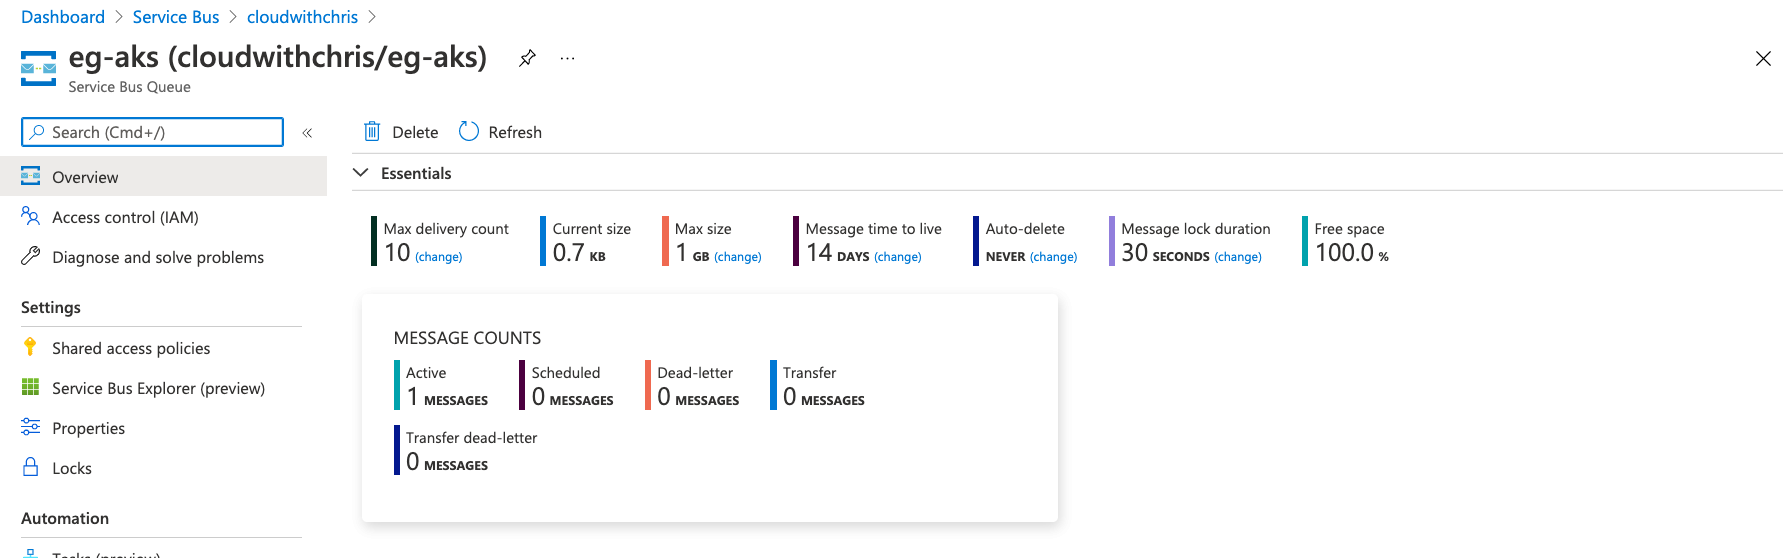 Screenshot of the Service Bus Queue overview page, showing that there is now 1 Active Message on the Queue